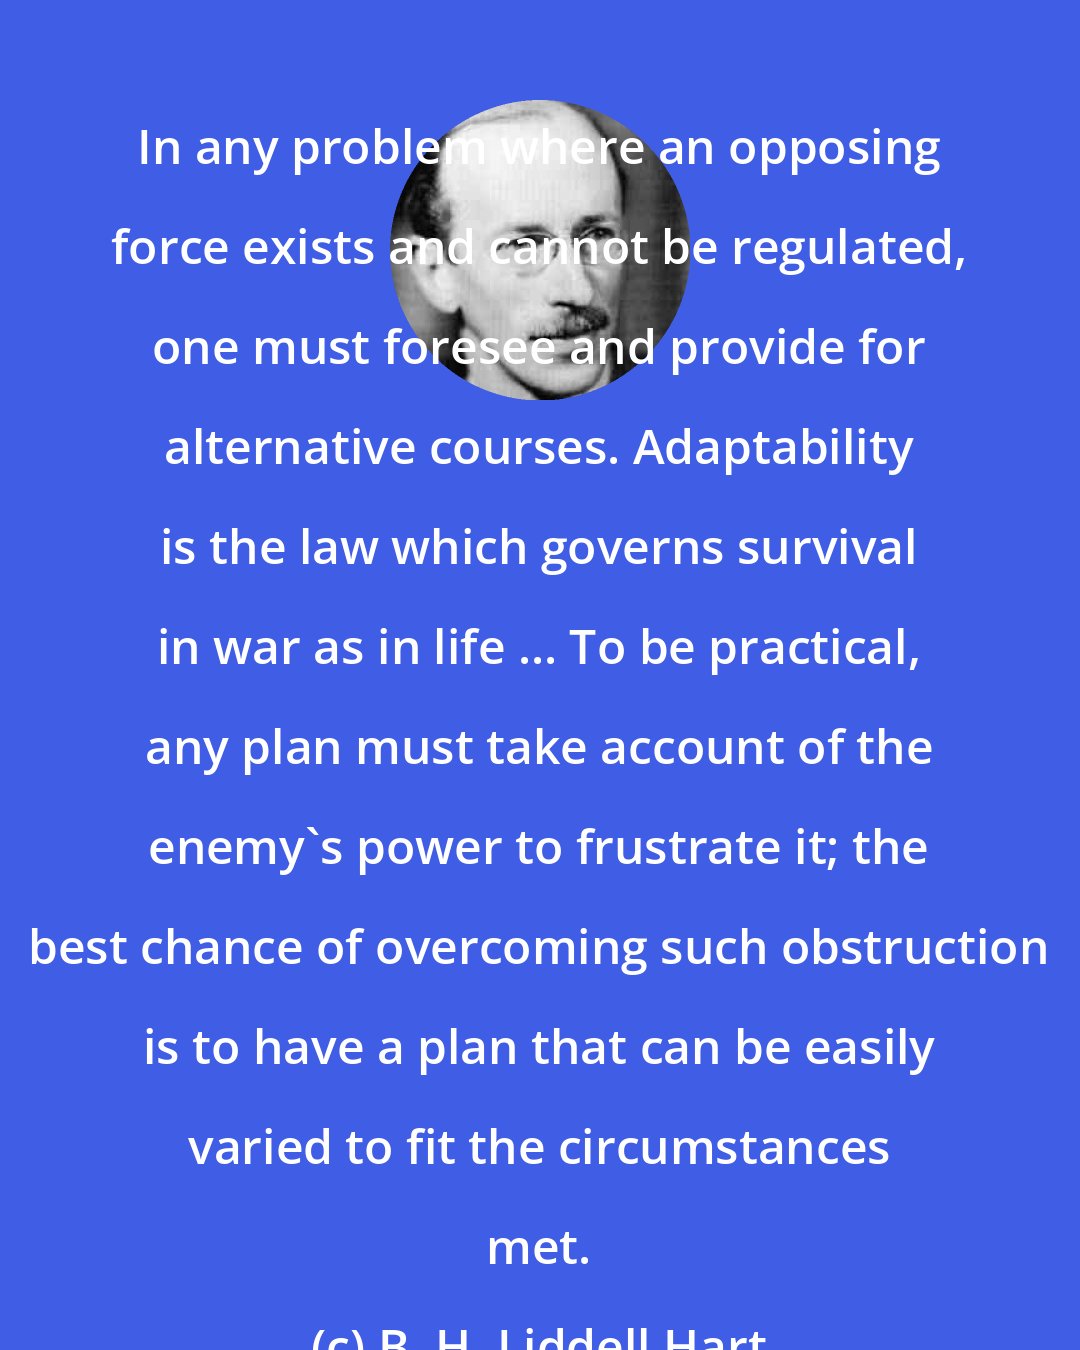 B. H. Liddell Hart: In any problem where an opposing force exists and cannot be regulated, one must foresee and provide for alternative courses. Adaptability is the law which governs survival in war as in life ... To be practical, any plan must take account of the enemy's power to frustrate it; the best chance of overcoming such obstruction is to have a plan that can be easily varied to fit the circumstances met.